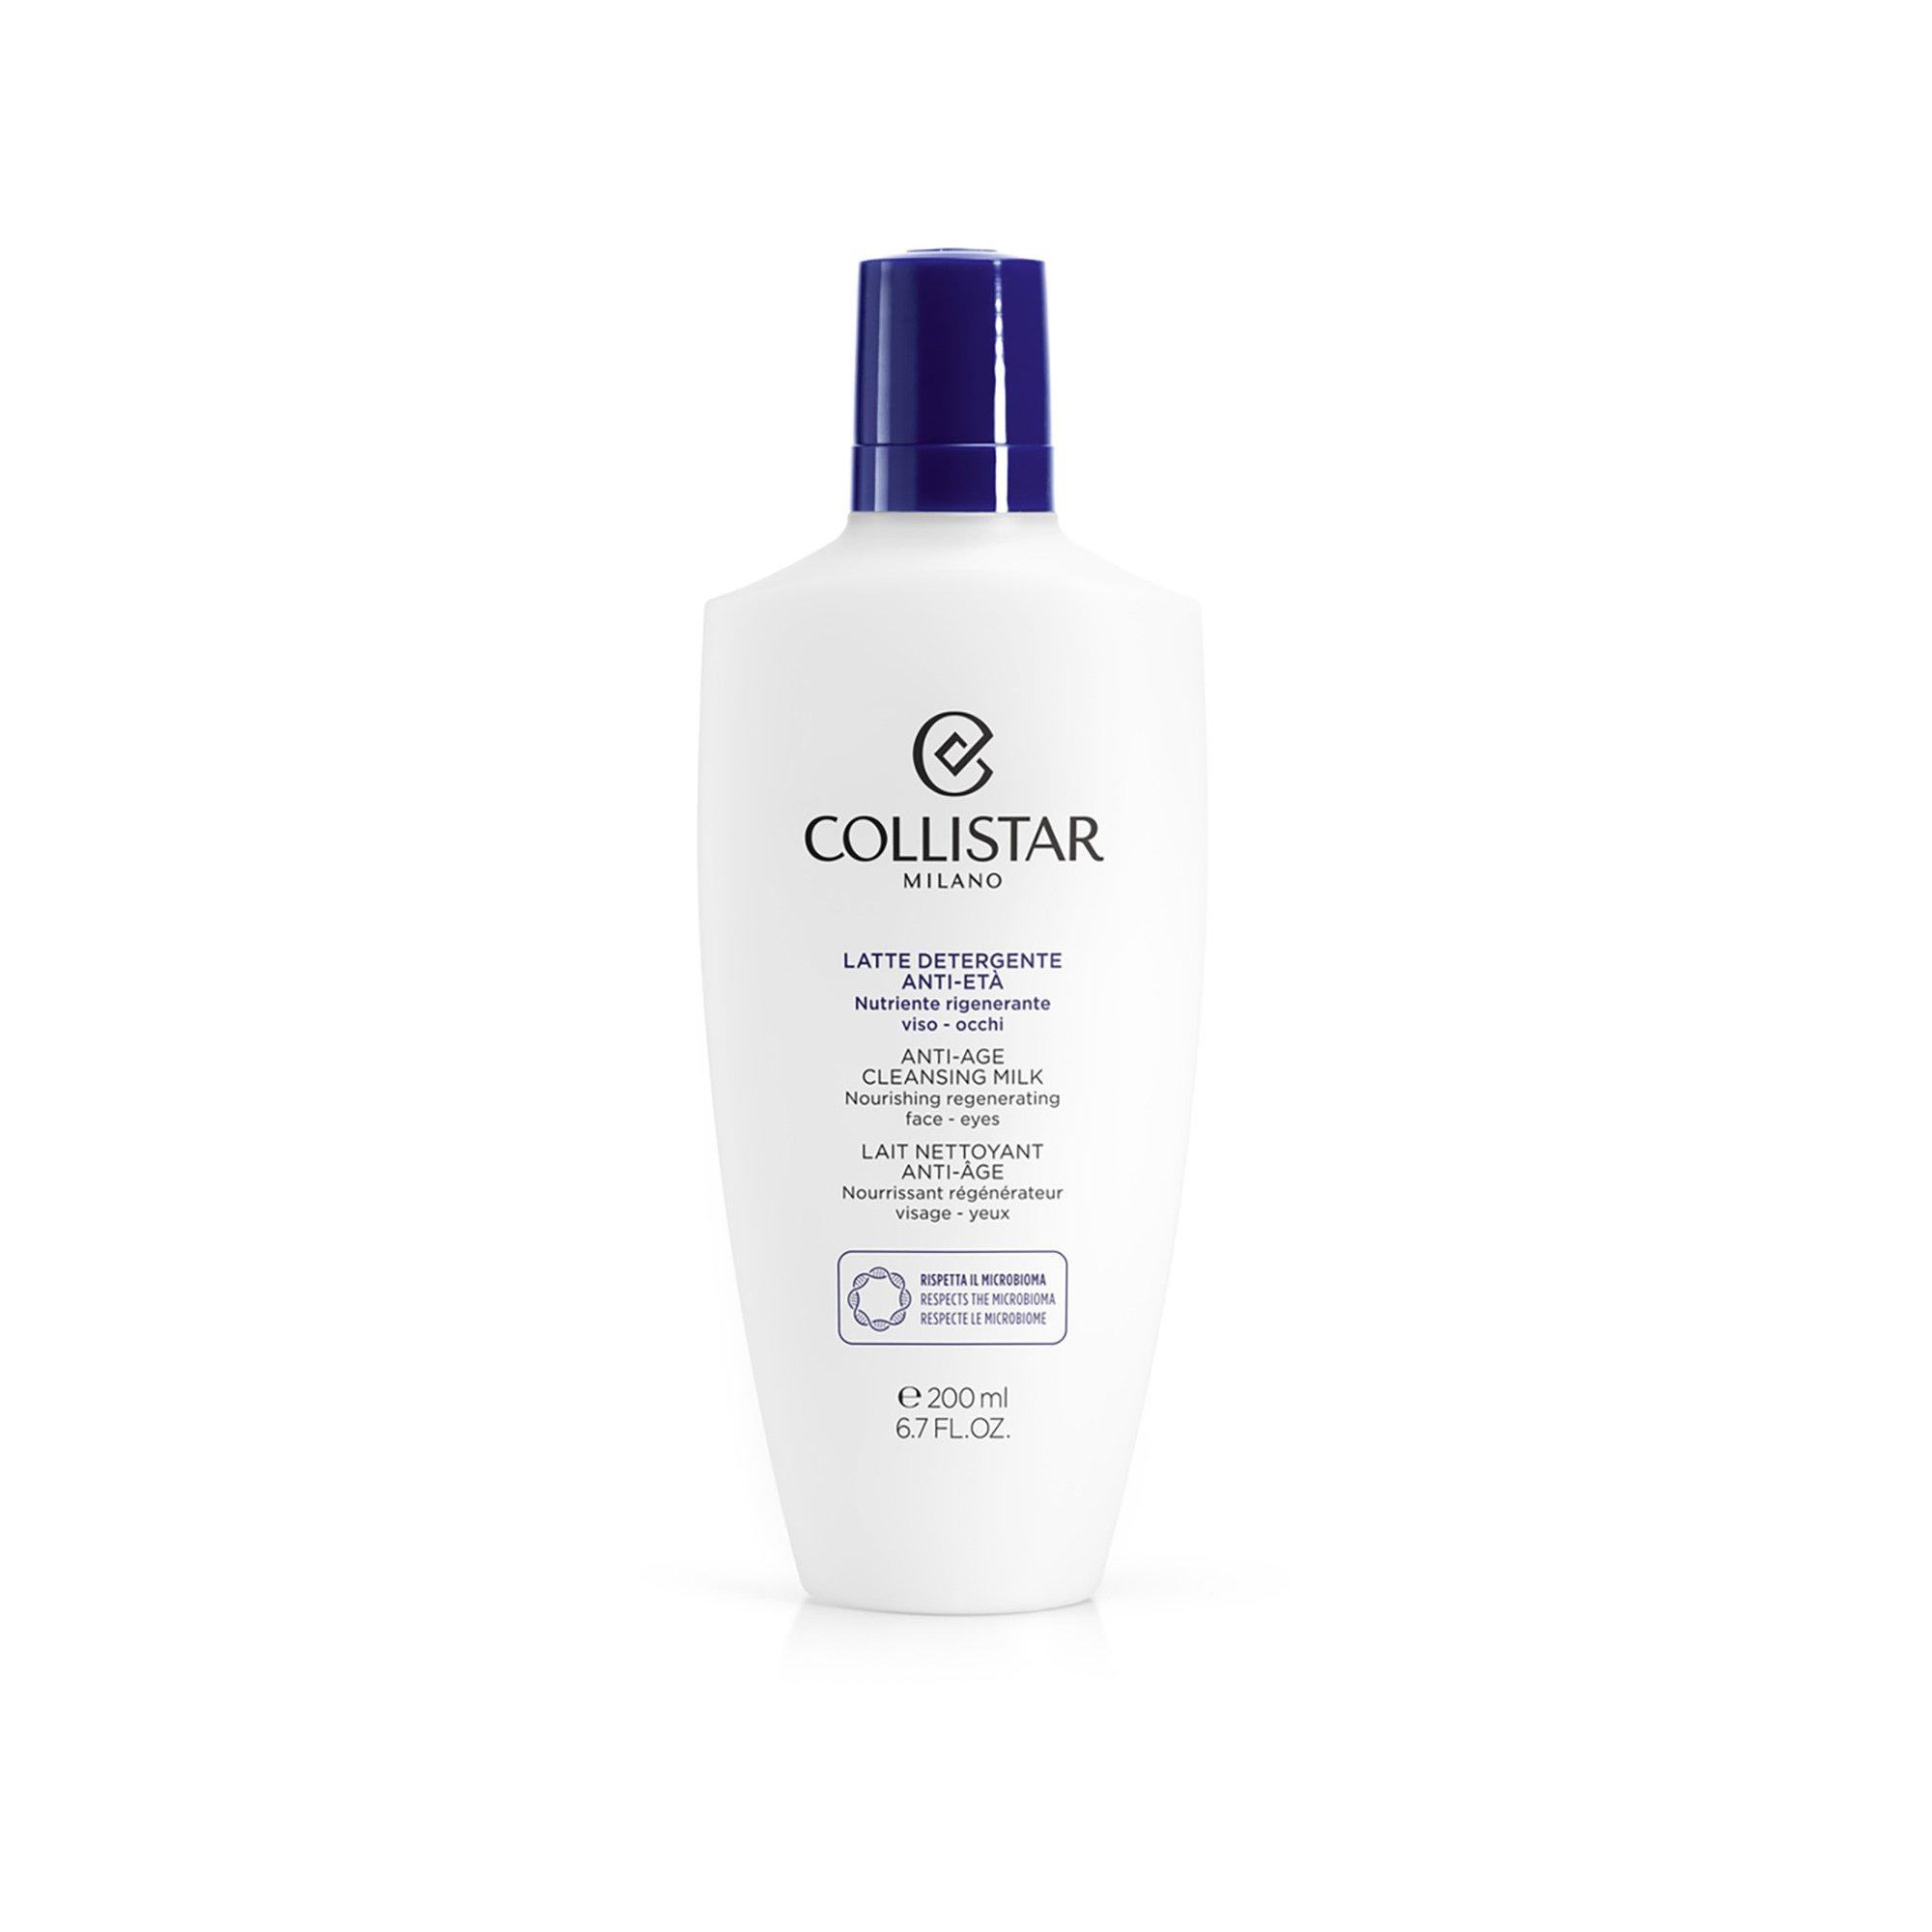 Image of COLLISTAR Cleansing Milk Face-Eyes